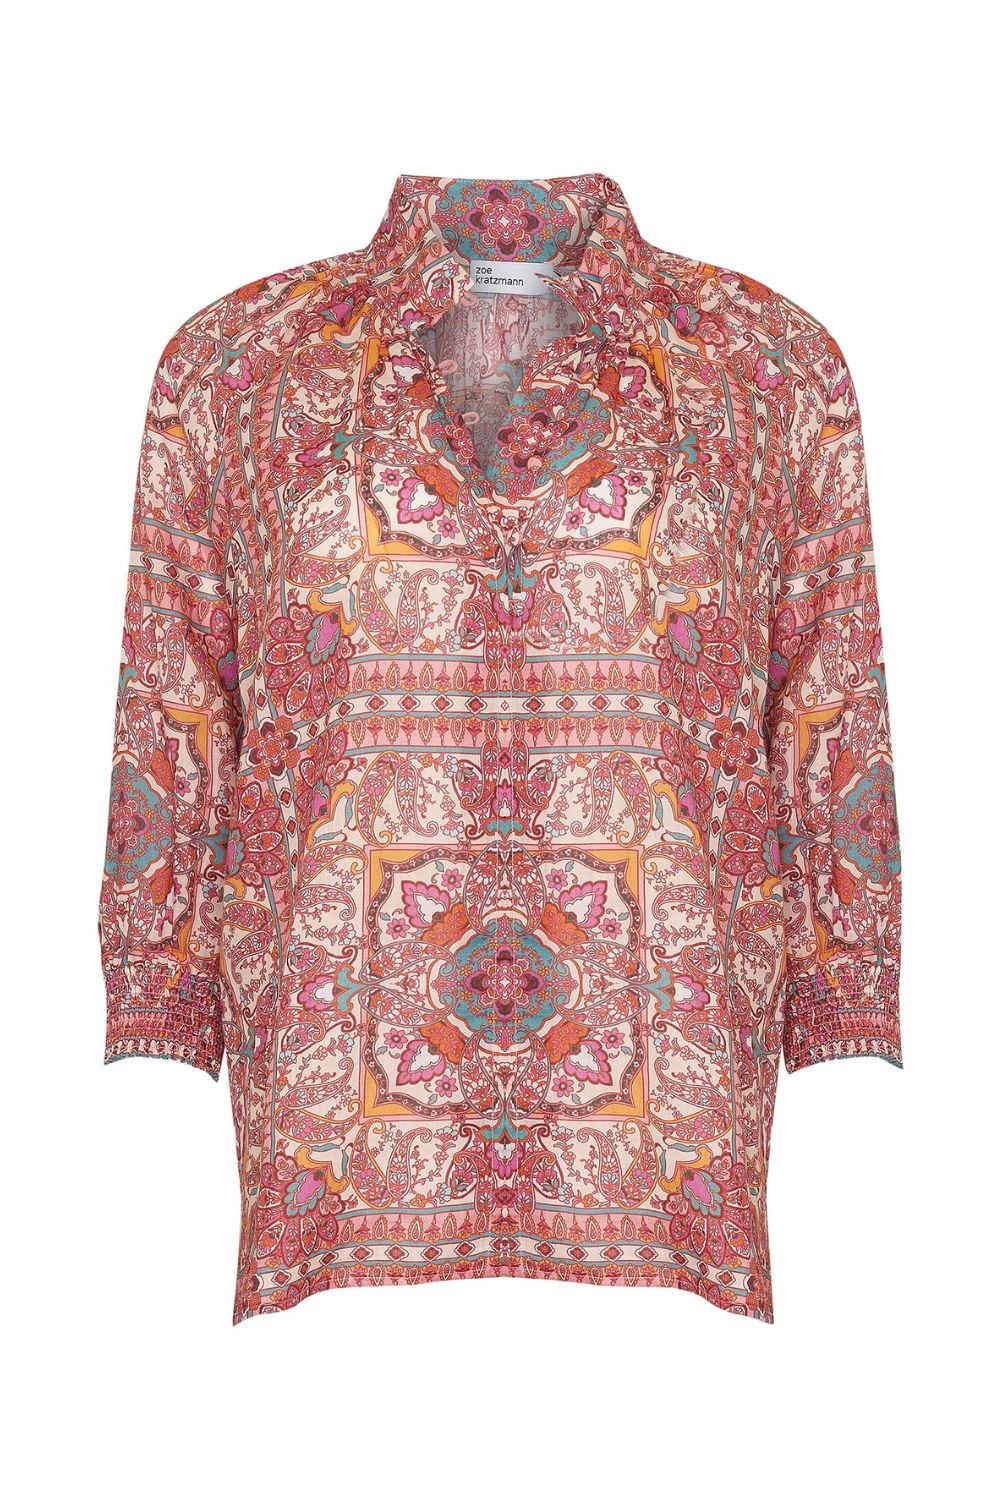 pink print, medium length sleeve, buttons down centre, small side splits, high neck, product image